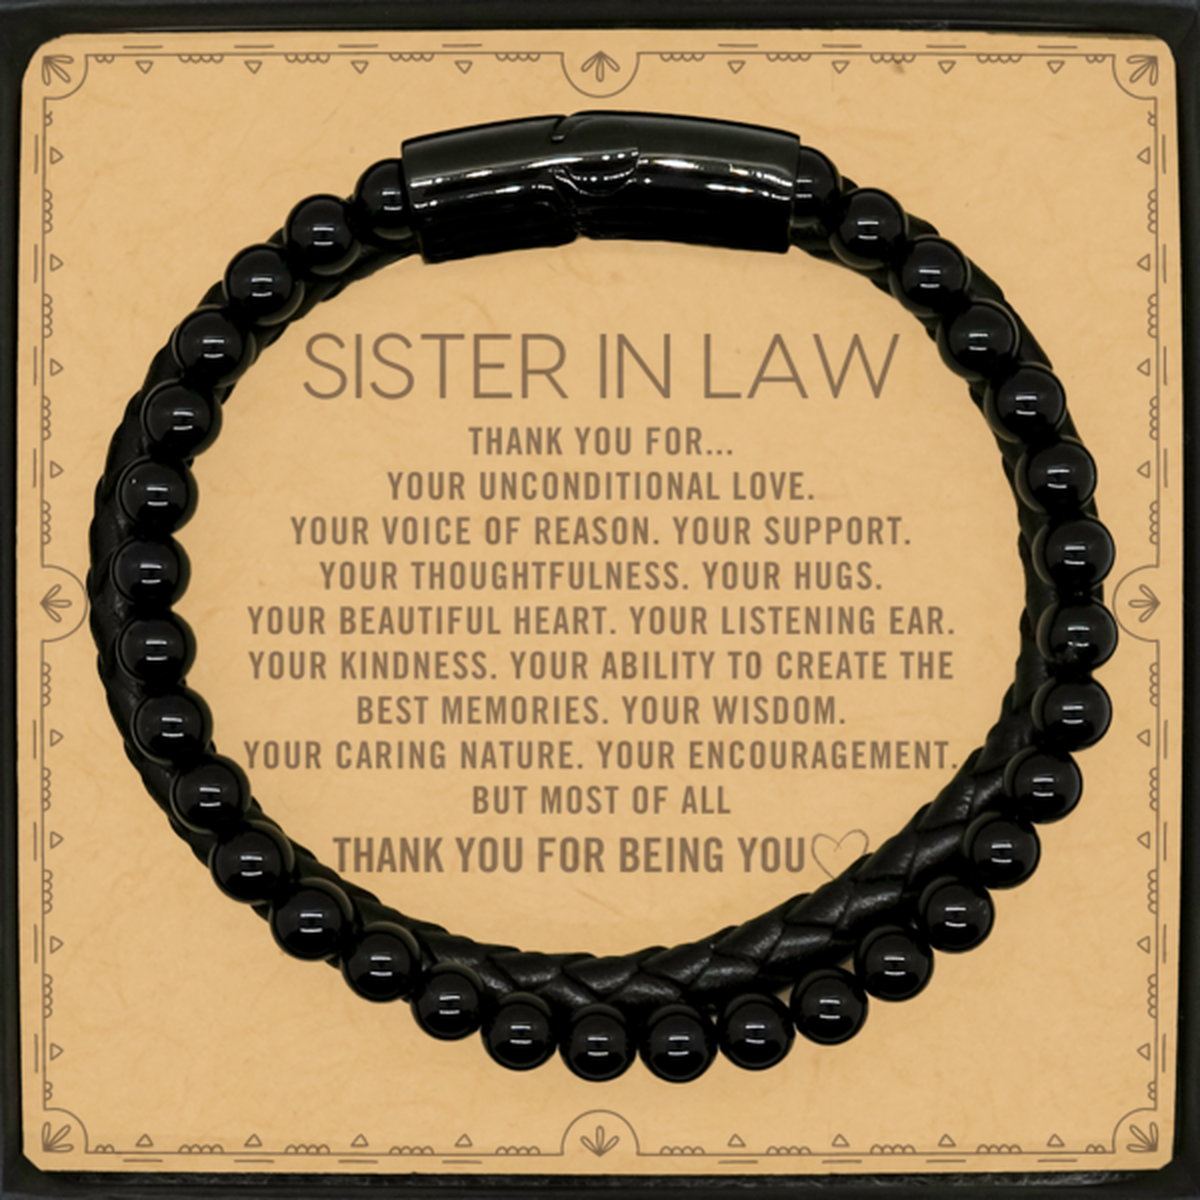 Sister In Law Stone Leather Bracelets Custom, Message Card Gifts For Sister In Law Christmas Graduation Birthday Gifts for Men Women Sister In Law Thank you for Your unconditional love